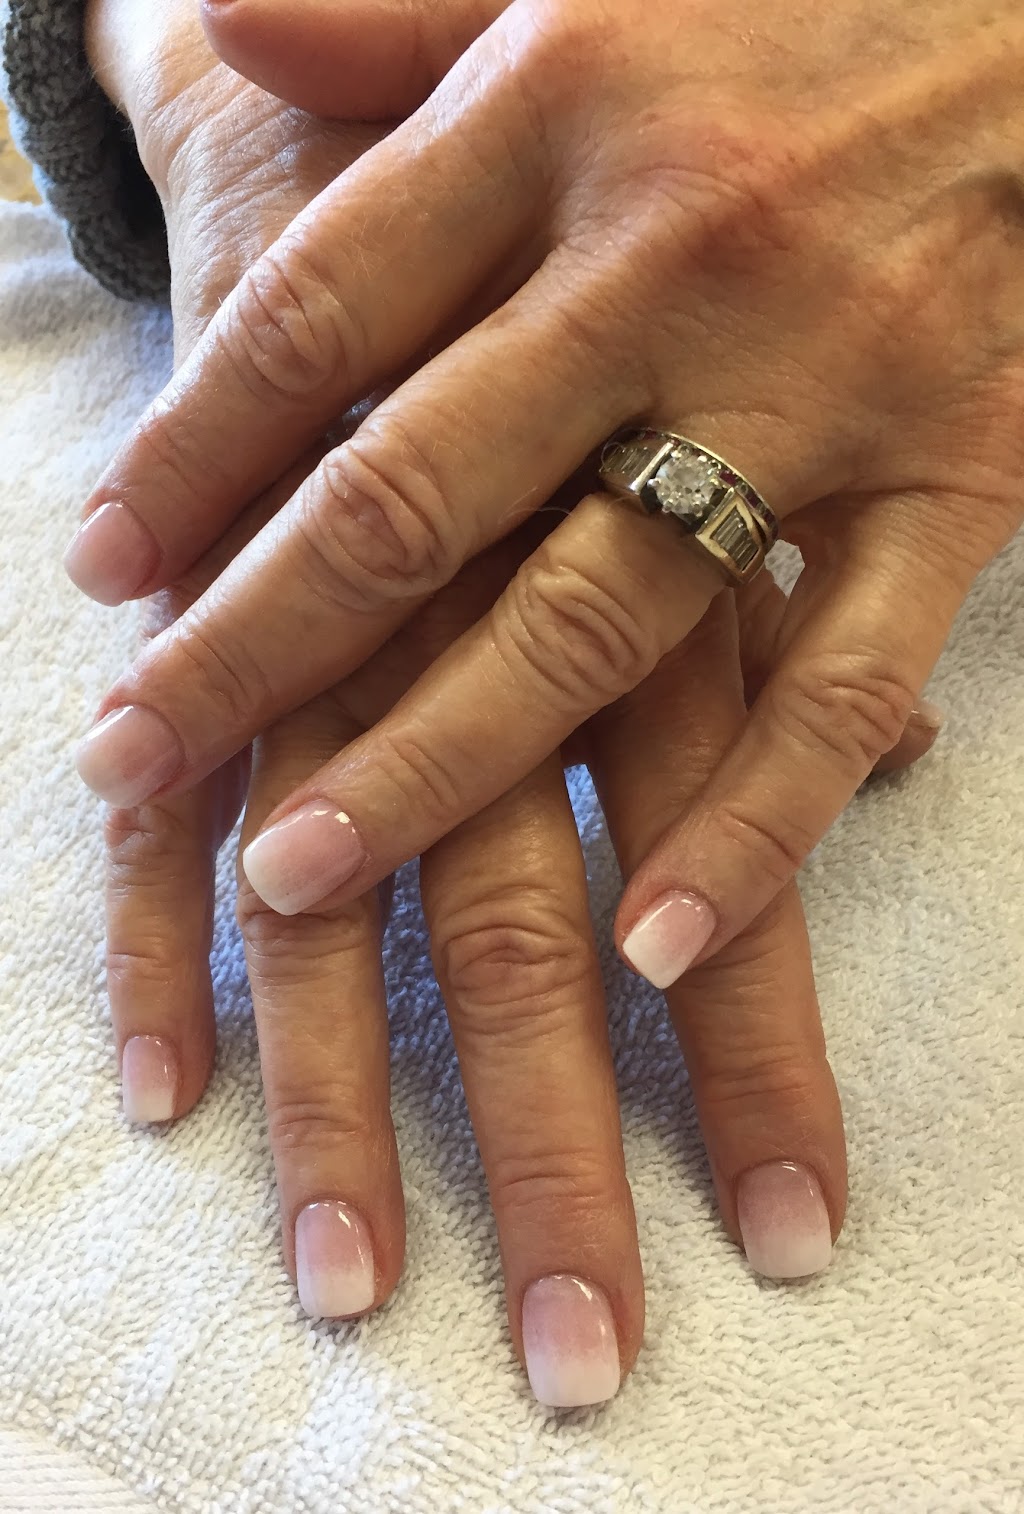 Color Nails | 15346 Manchester Rd, Ellisville, MO 63011, USA | Phone: (636) 207-8029